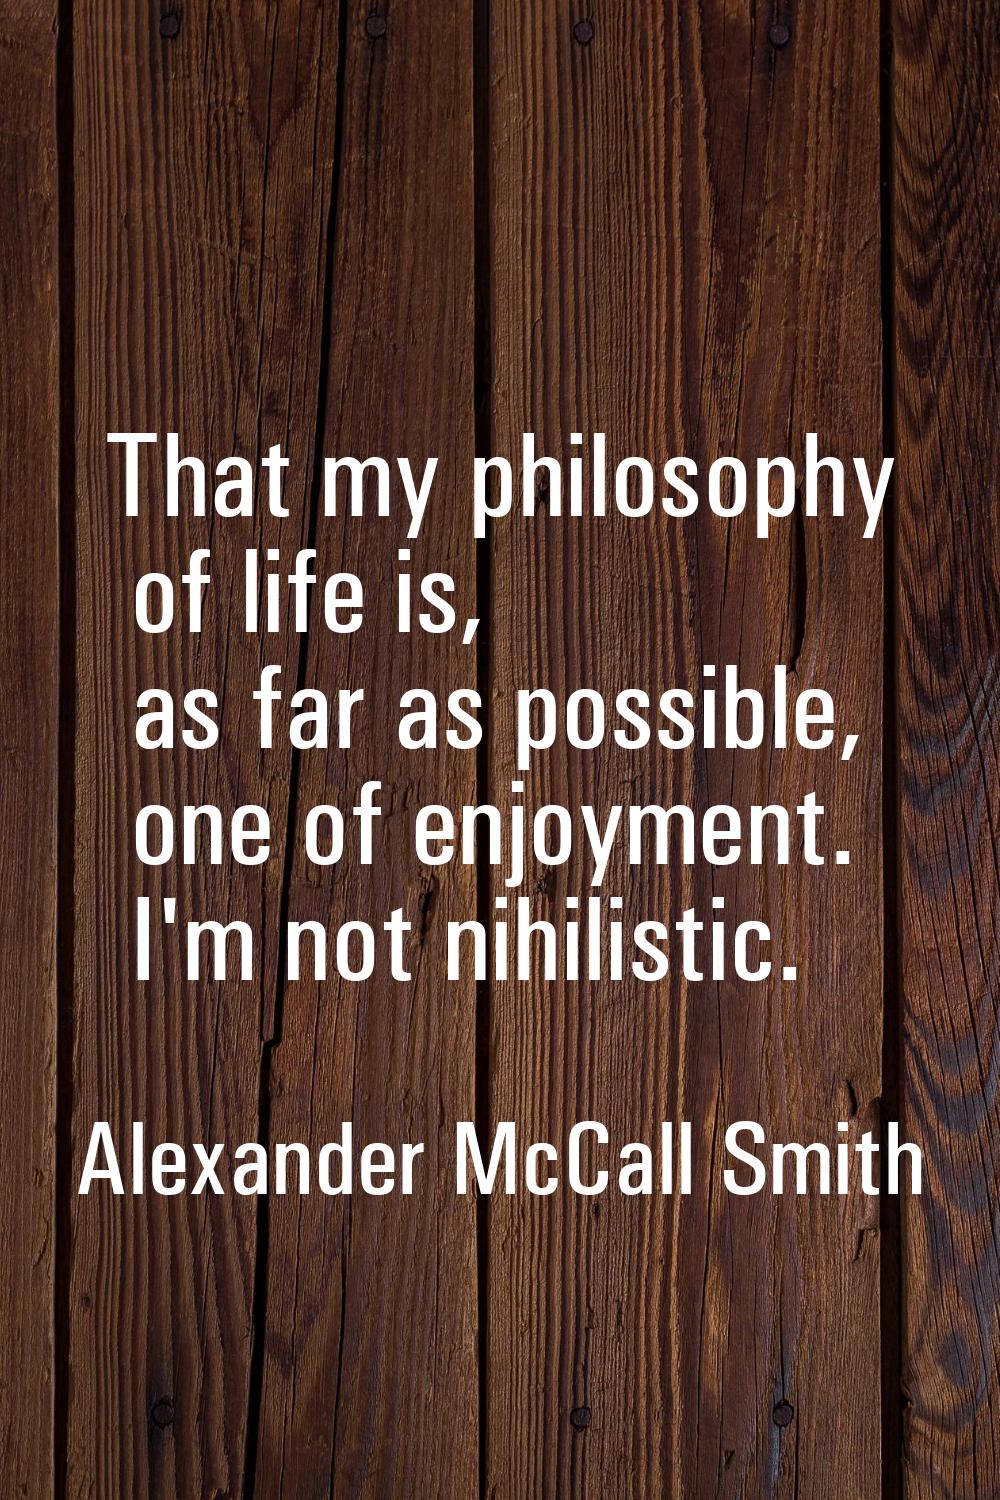 That my philosophy of life is, as far as possible, one of enjoyment. I'm not nihilistic.